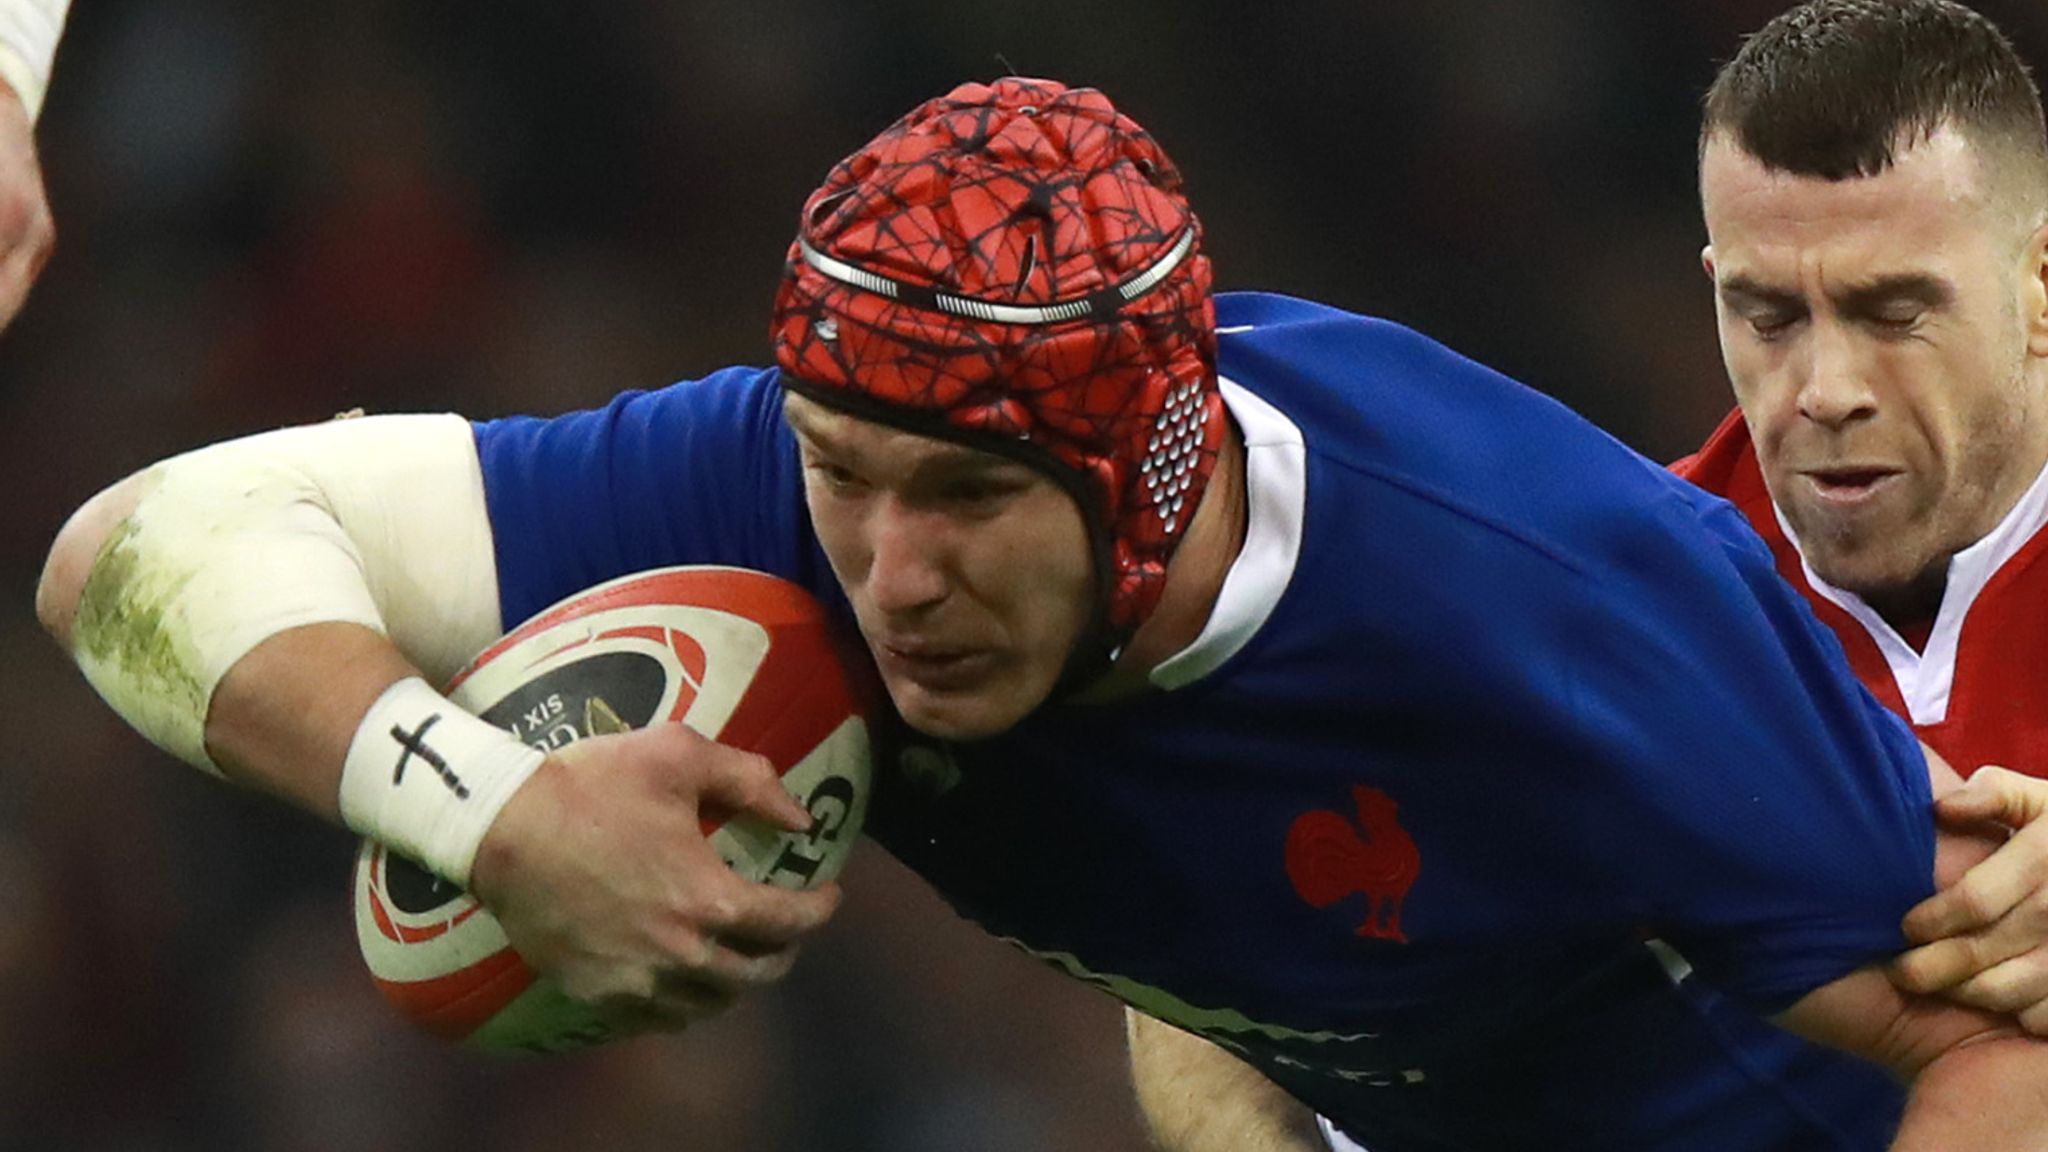 France's Bernard Le Roux cited for incident with Wales captain Alun Wyn  Jones | Rugby Union News | Sky Sports